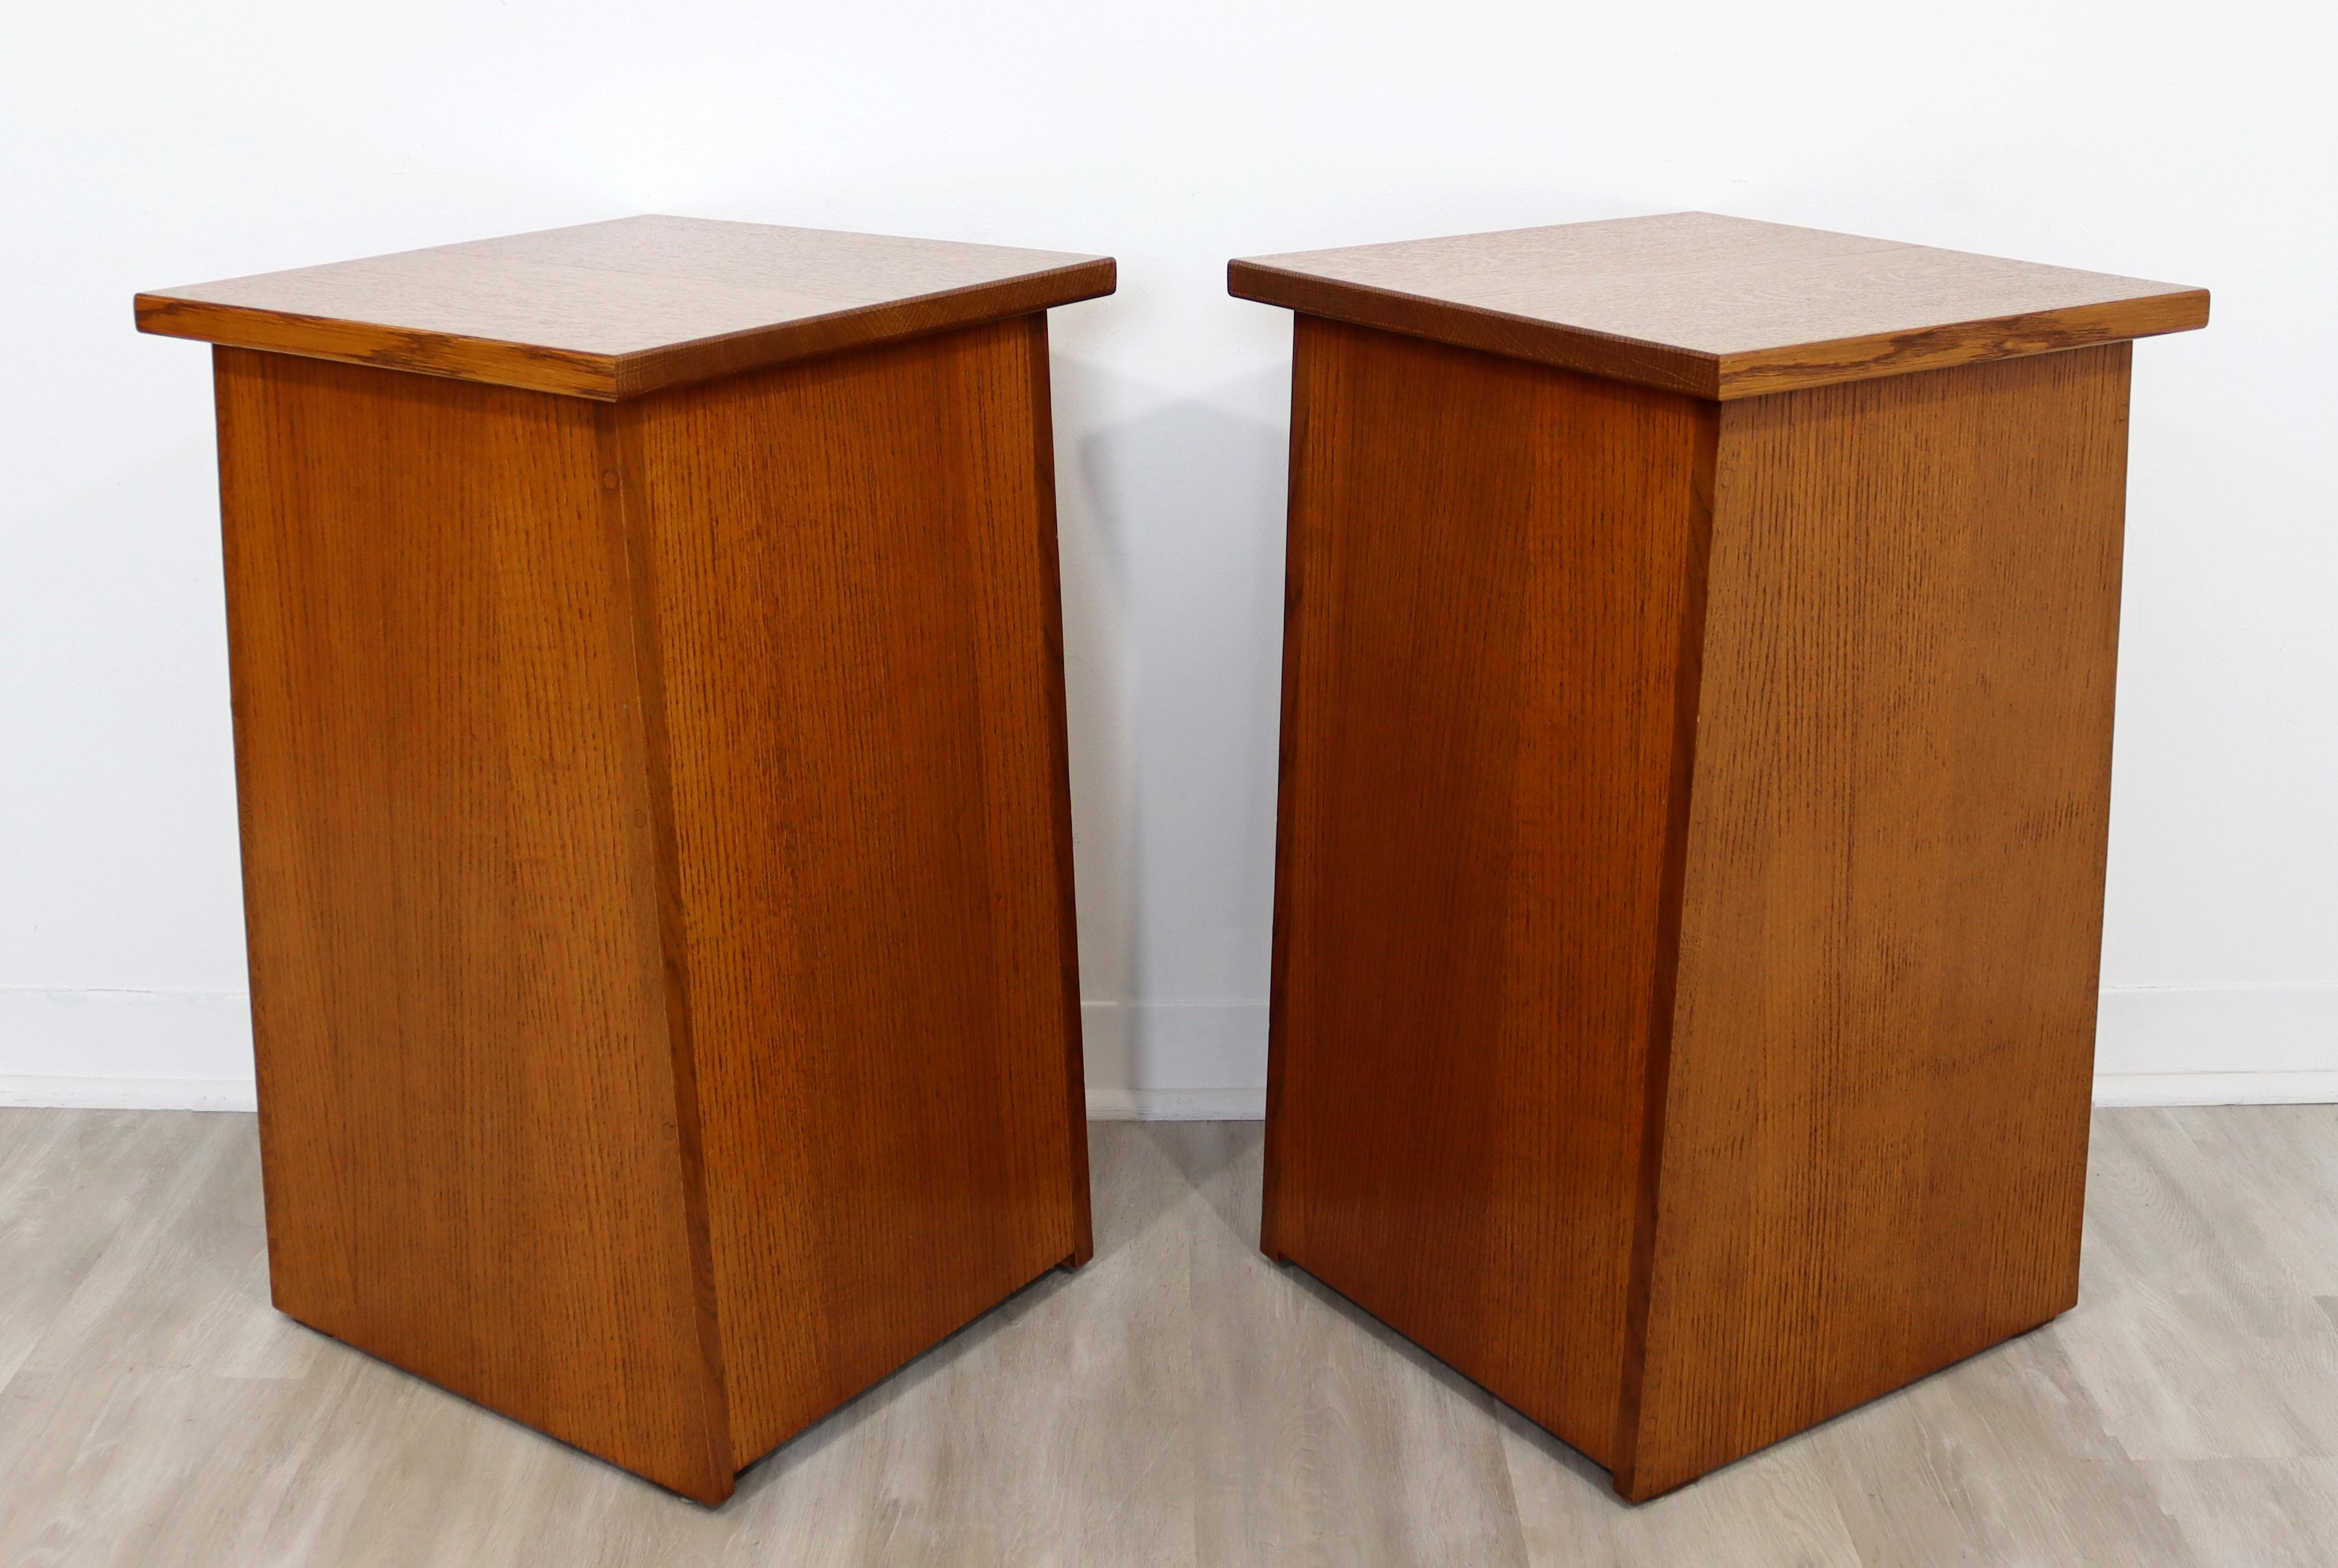 Late 20th Century Mid-Century Modern Mission Style Pair of Wood Nightstands Side End Tables, 1970s